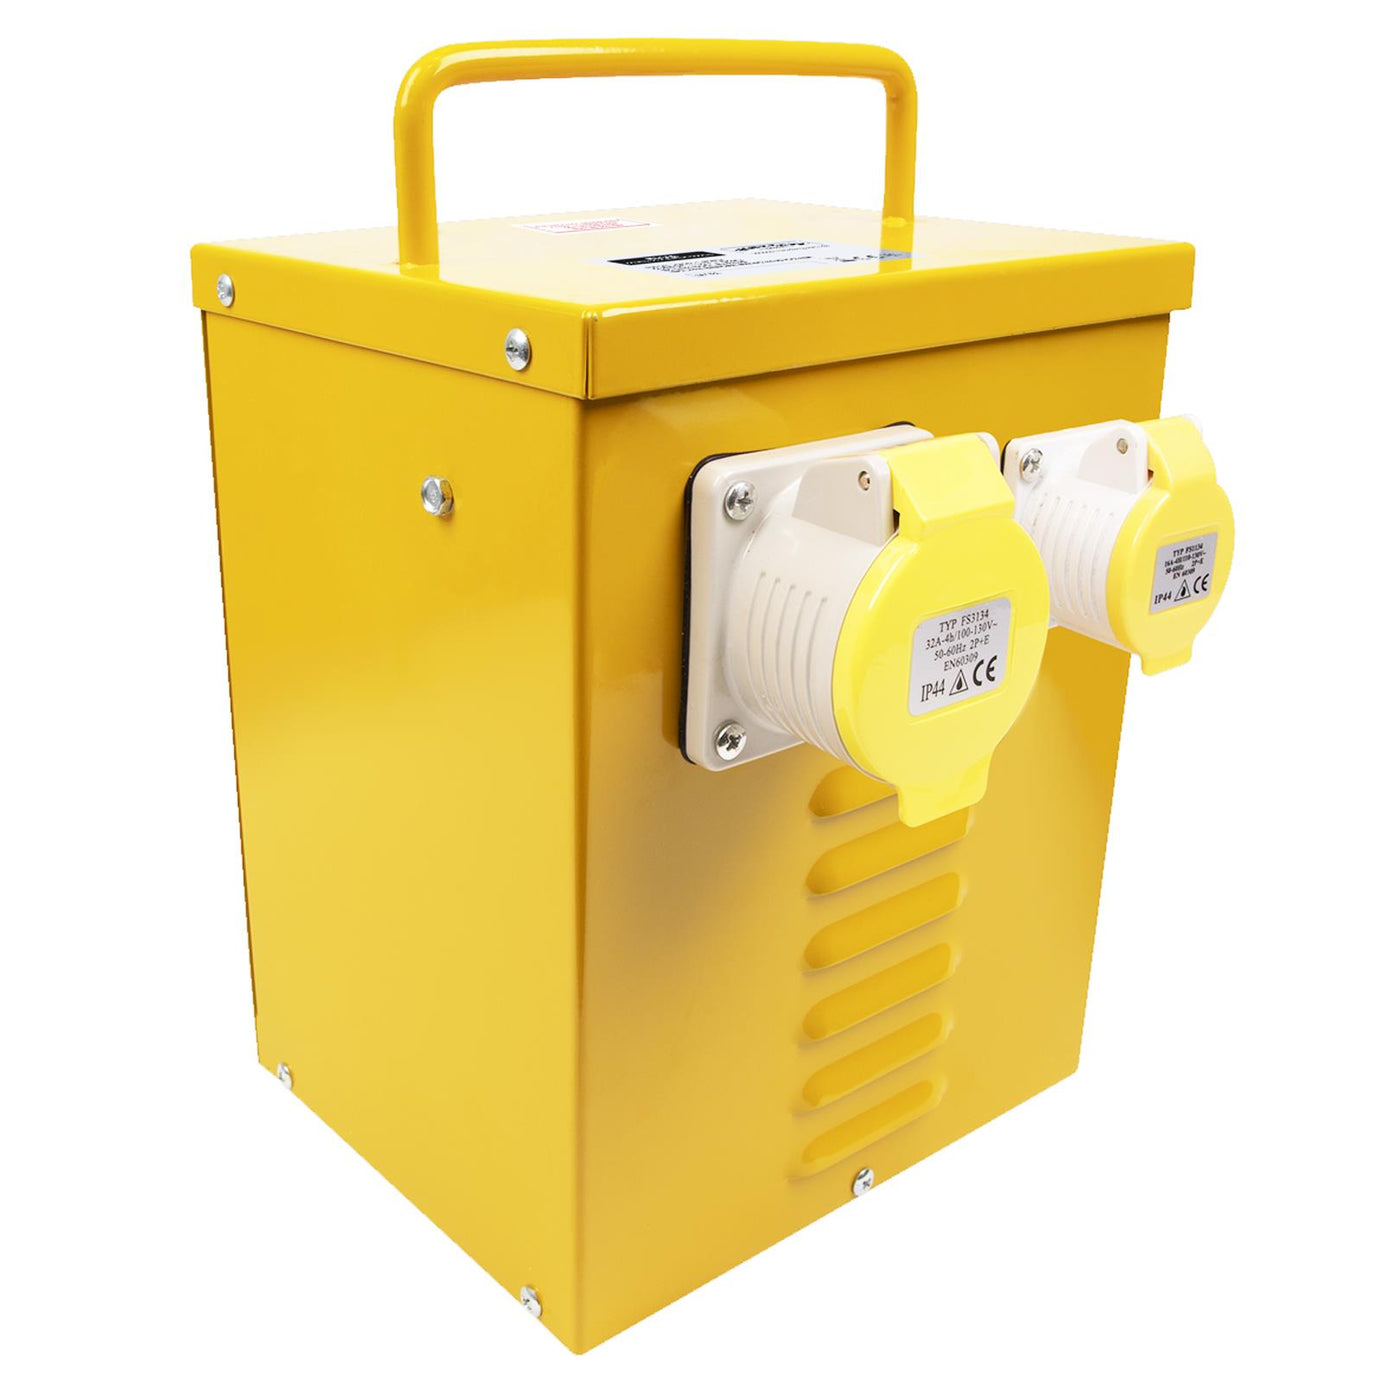 Sealey 5kVA Portable Vented Transformer 16/32A Outlets